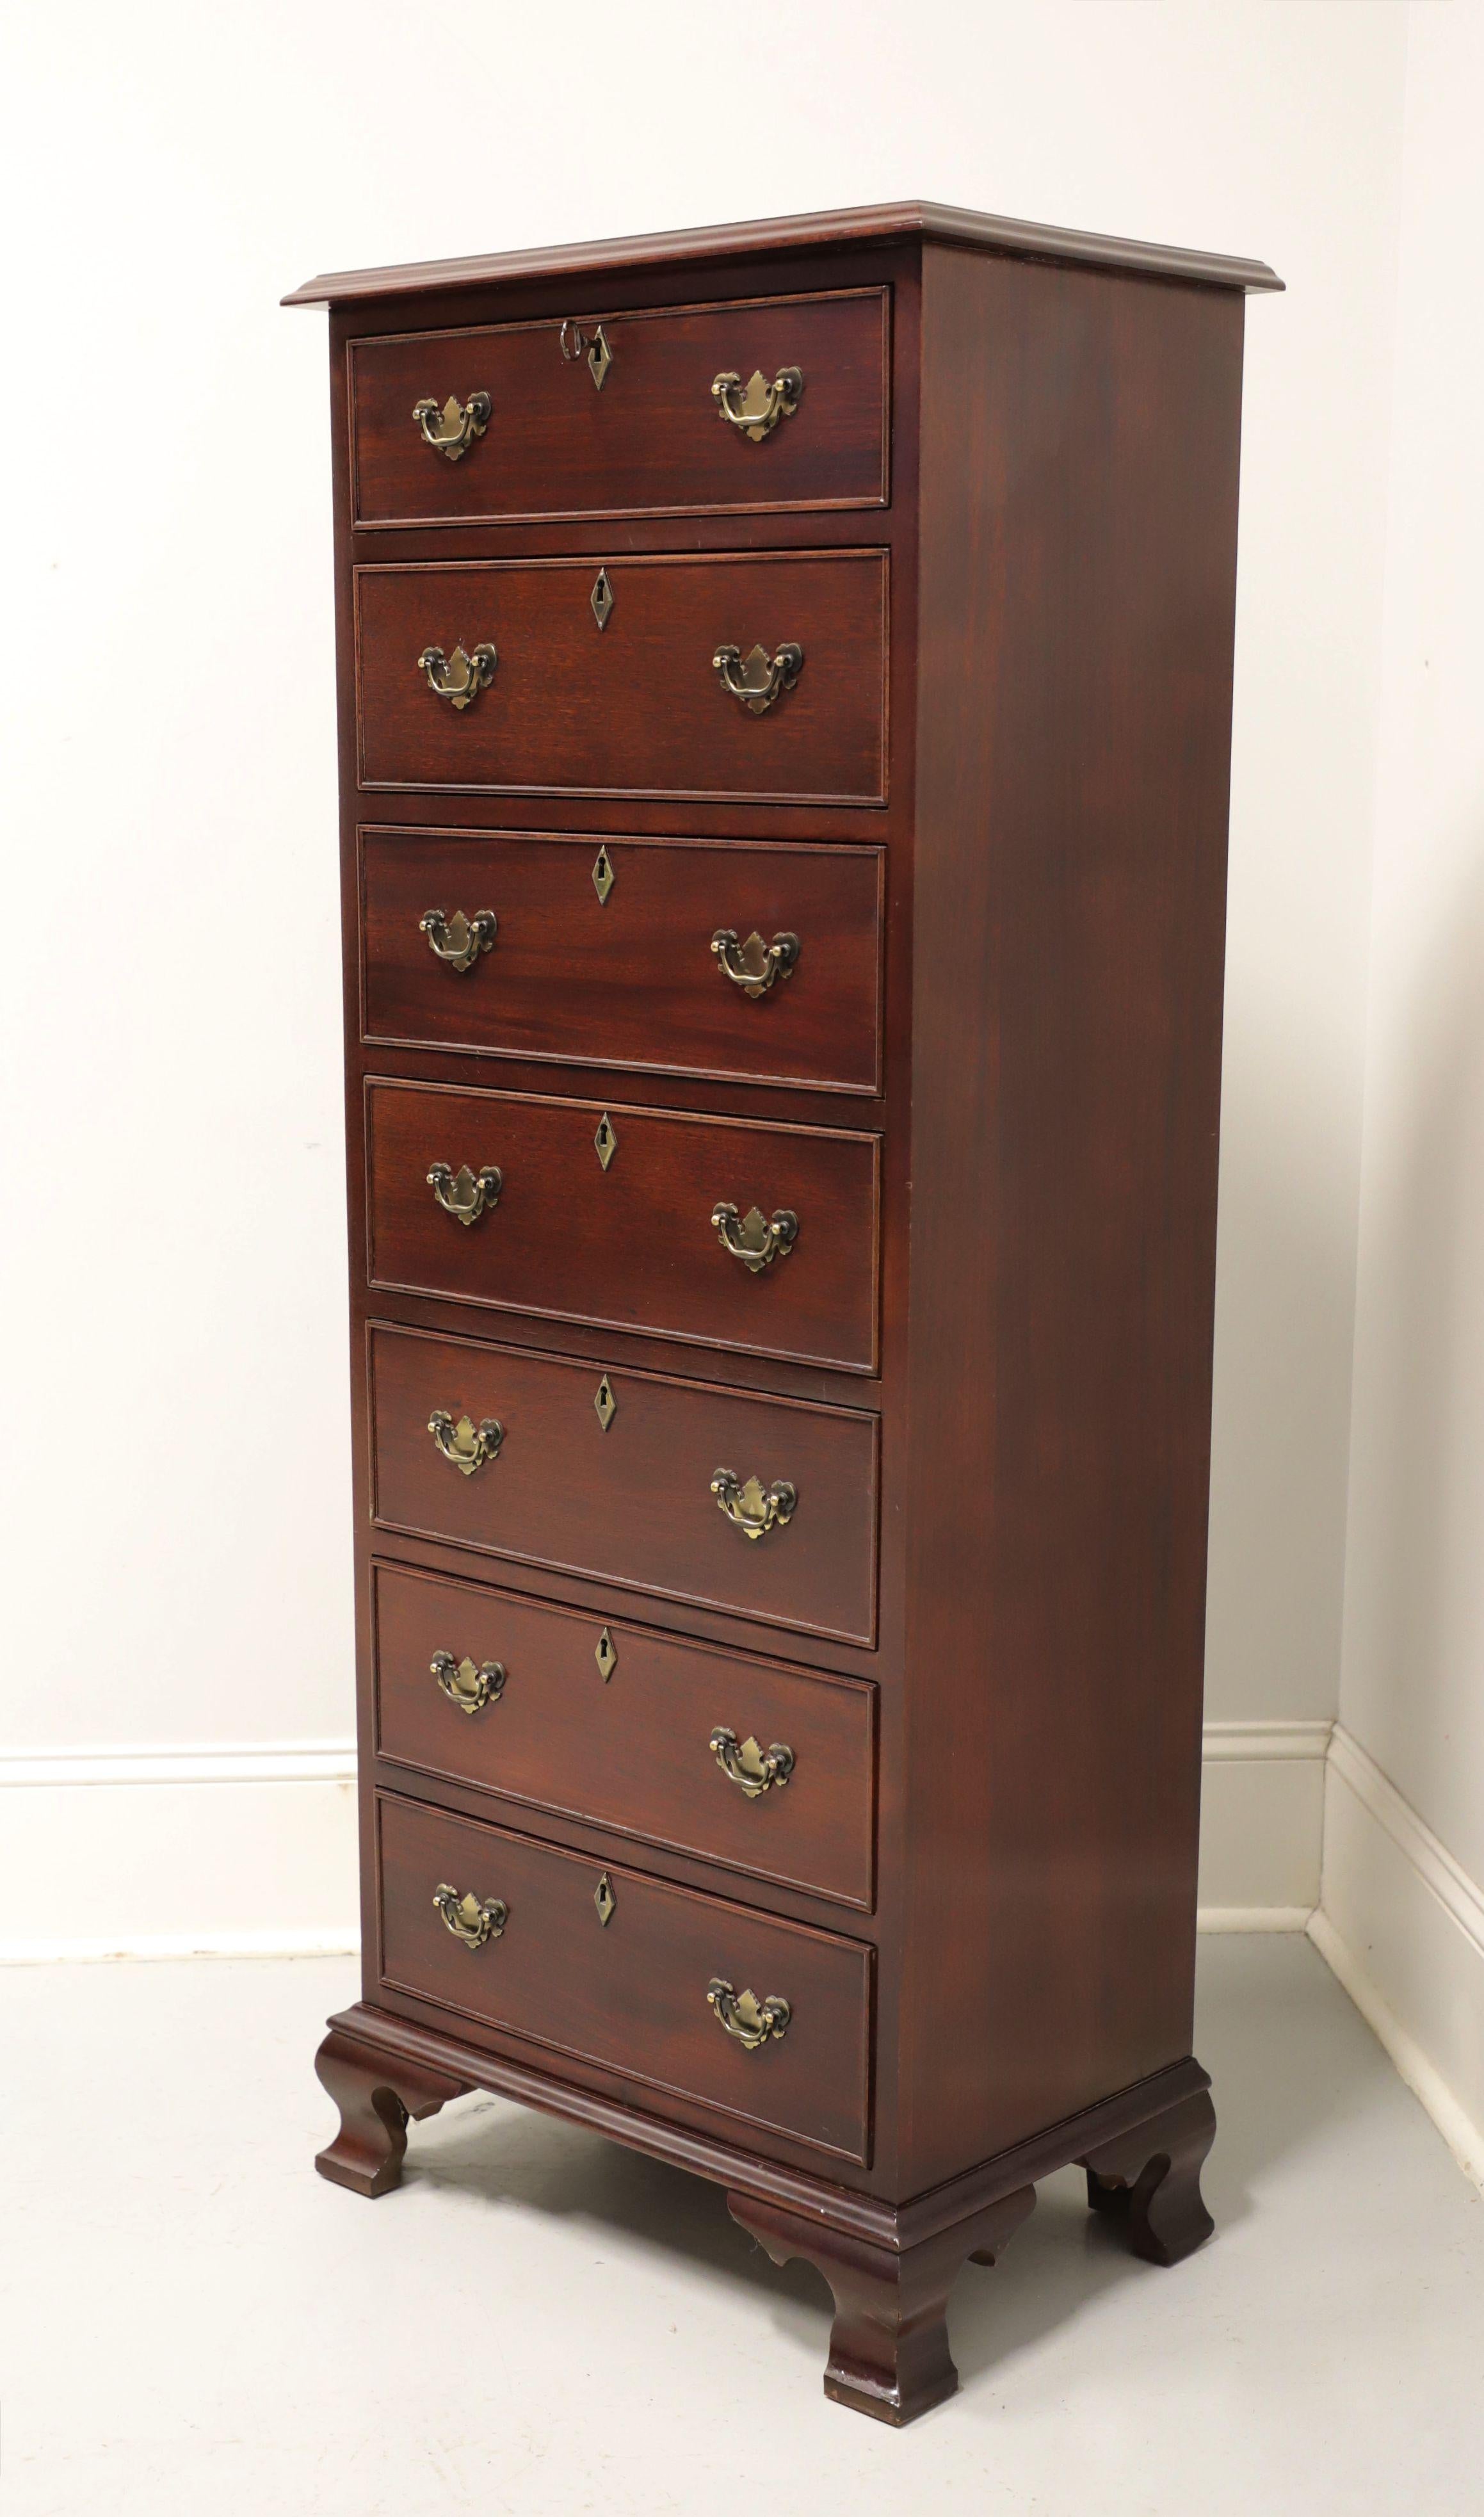 American CRAFTIQUE Solid Mahogany Chippendale Semainier Lingerie Chest with Ogee Feet